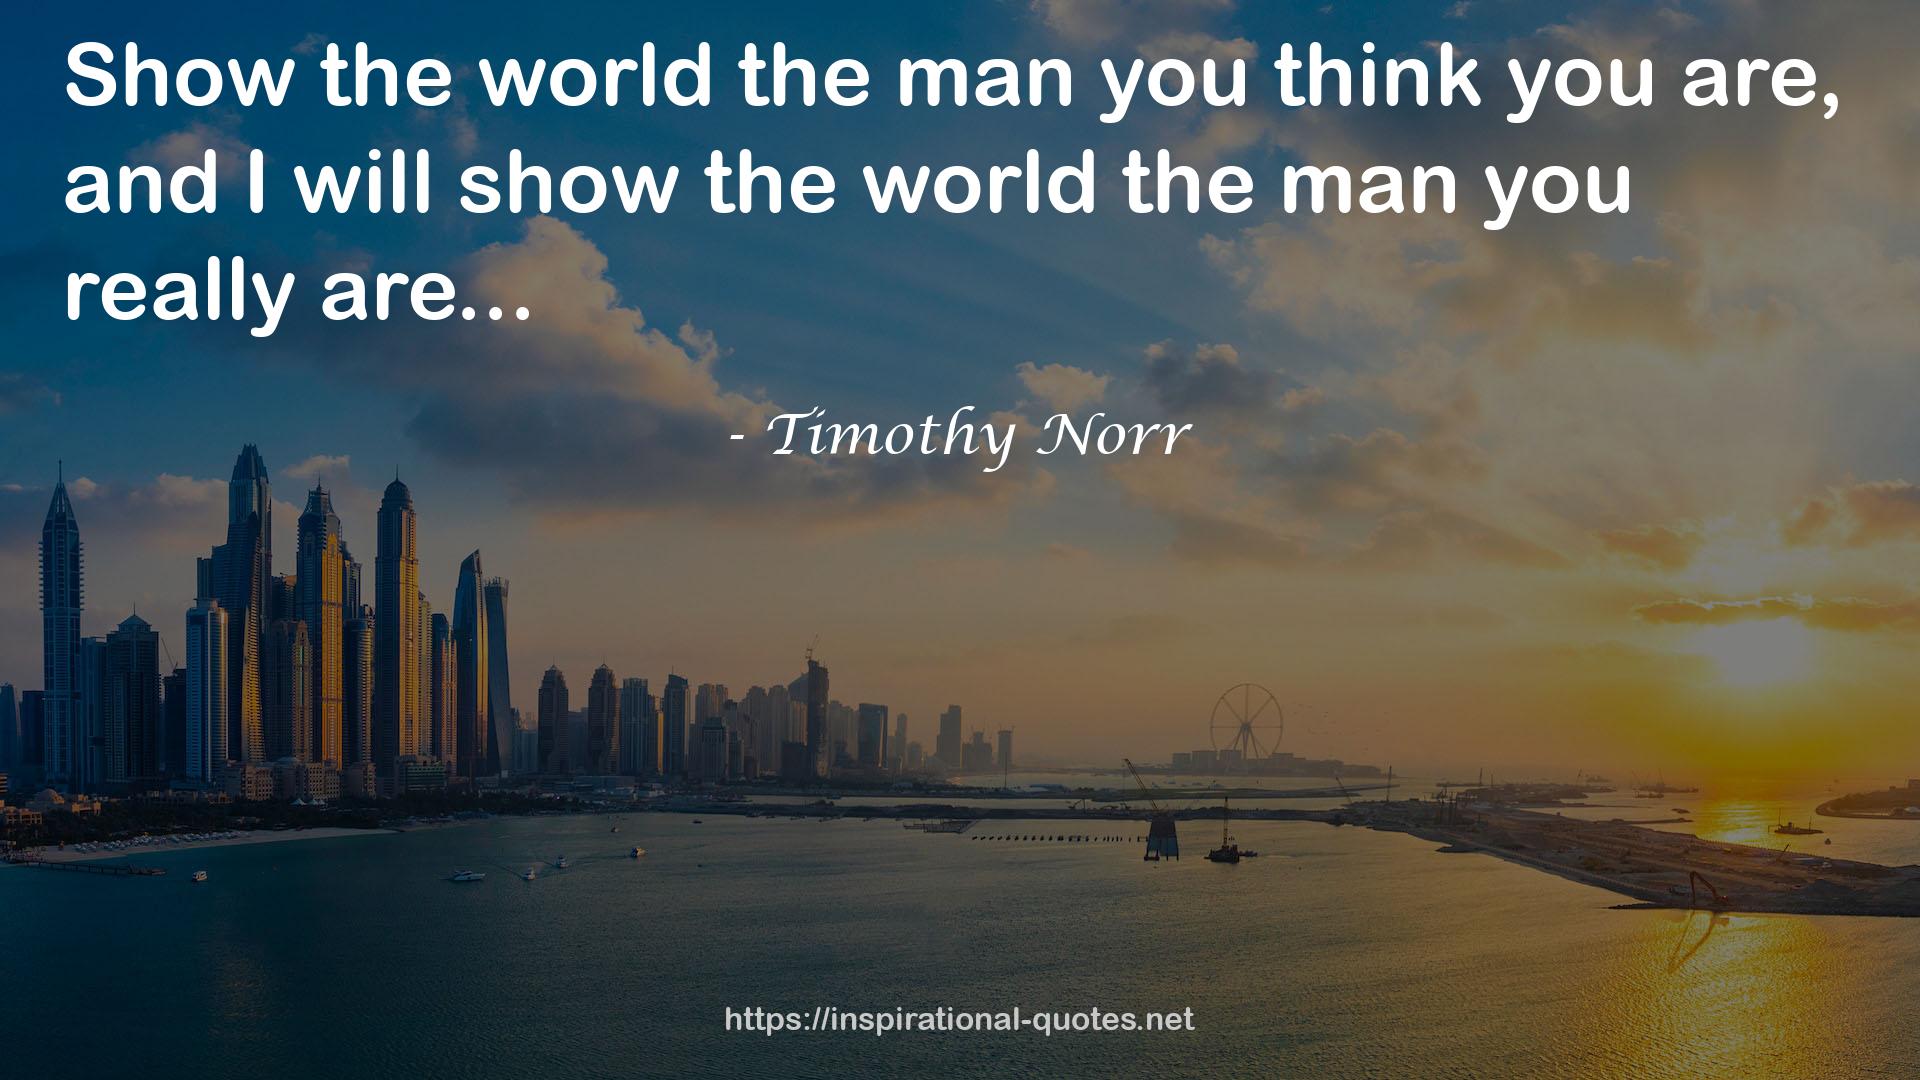 Timothy Norr QUOTES